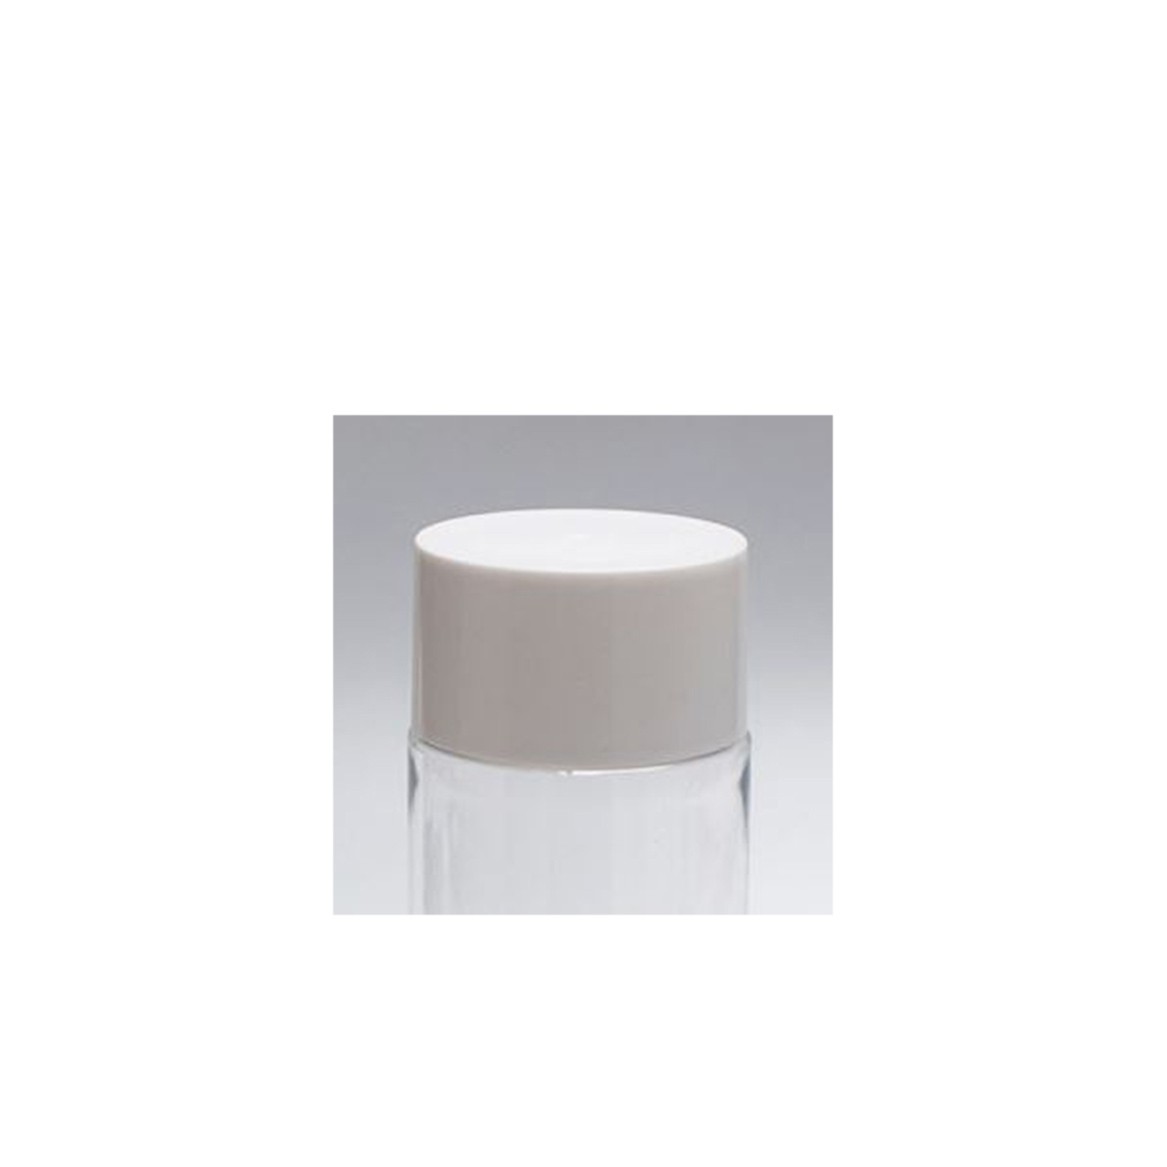 Beauty product packaging matte gold plastic caps for plastic bottles container body and face product